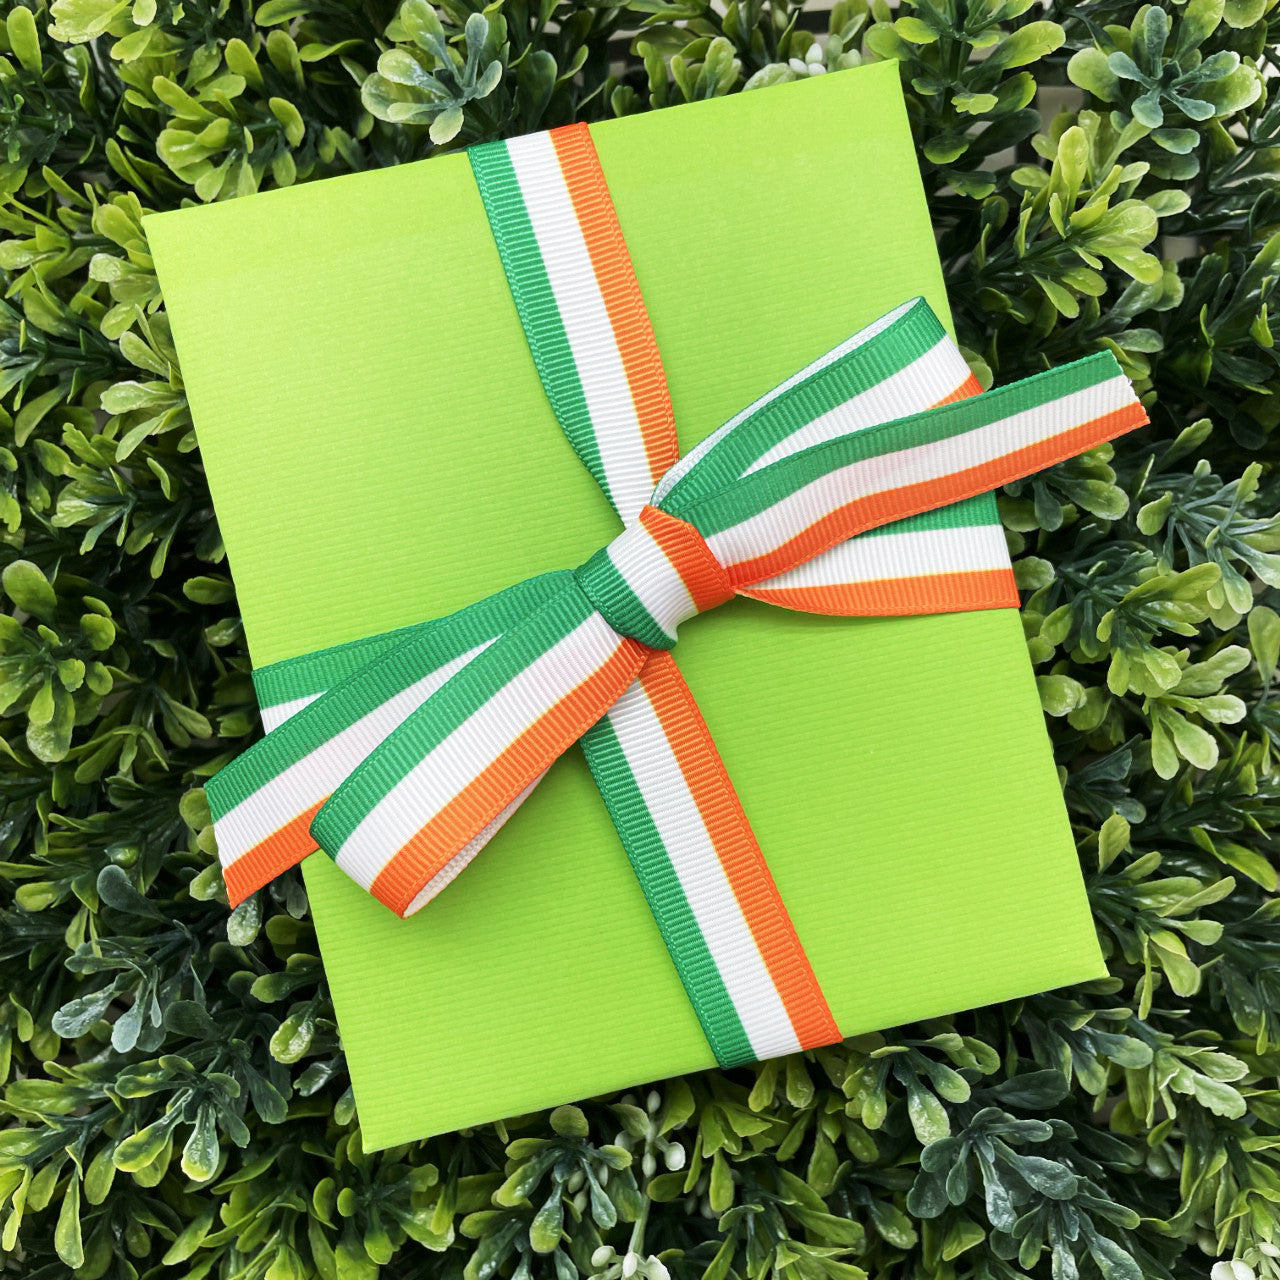 Tie and Irish themed gift with our Irish flag ribbon for the perfect presentation!